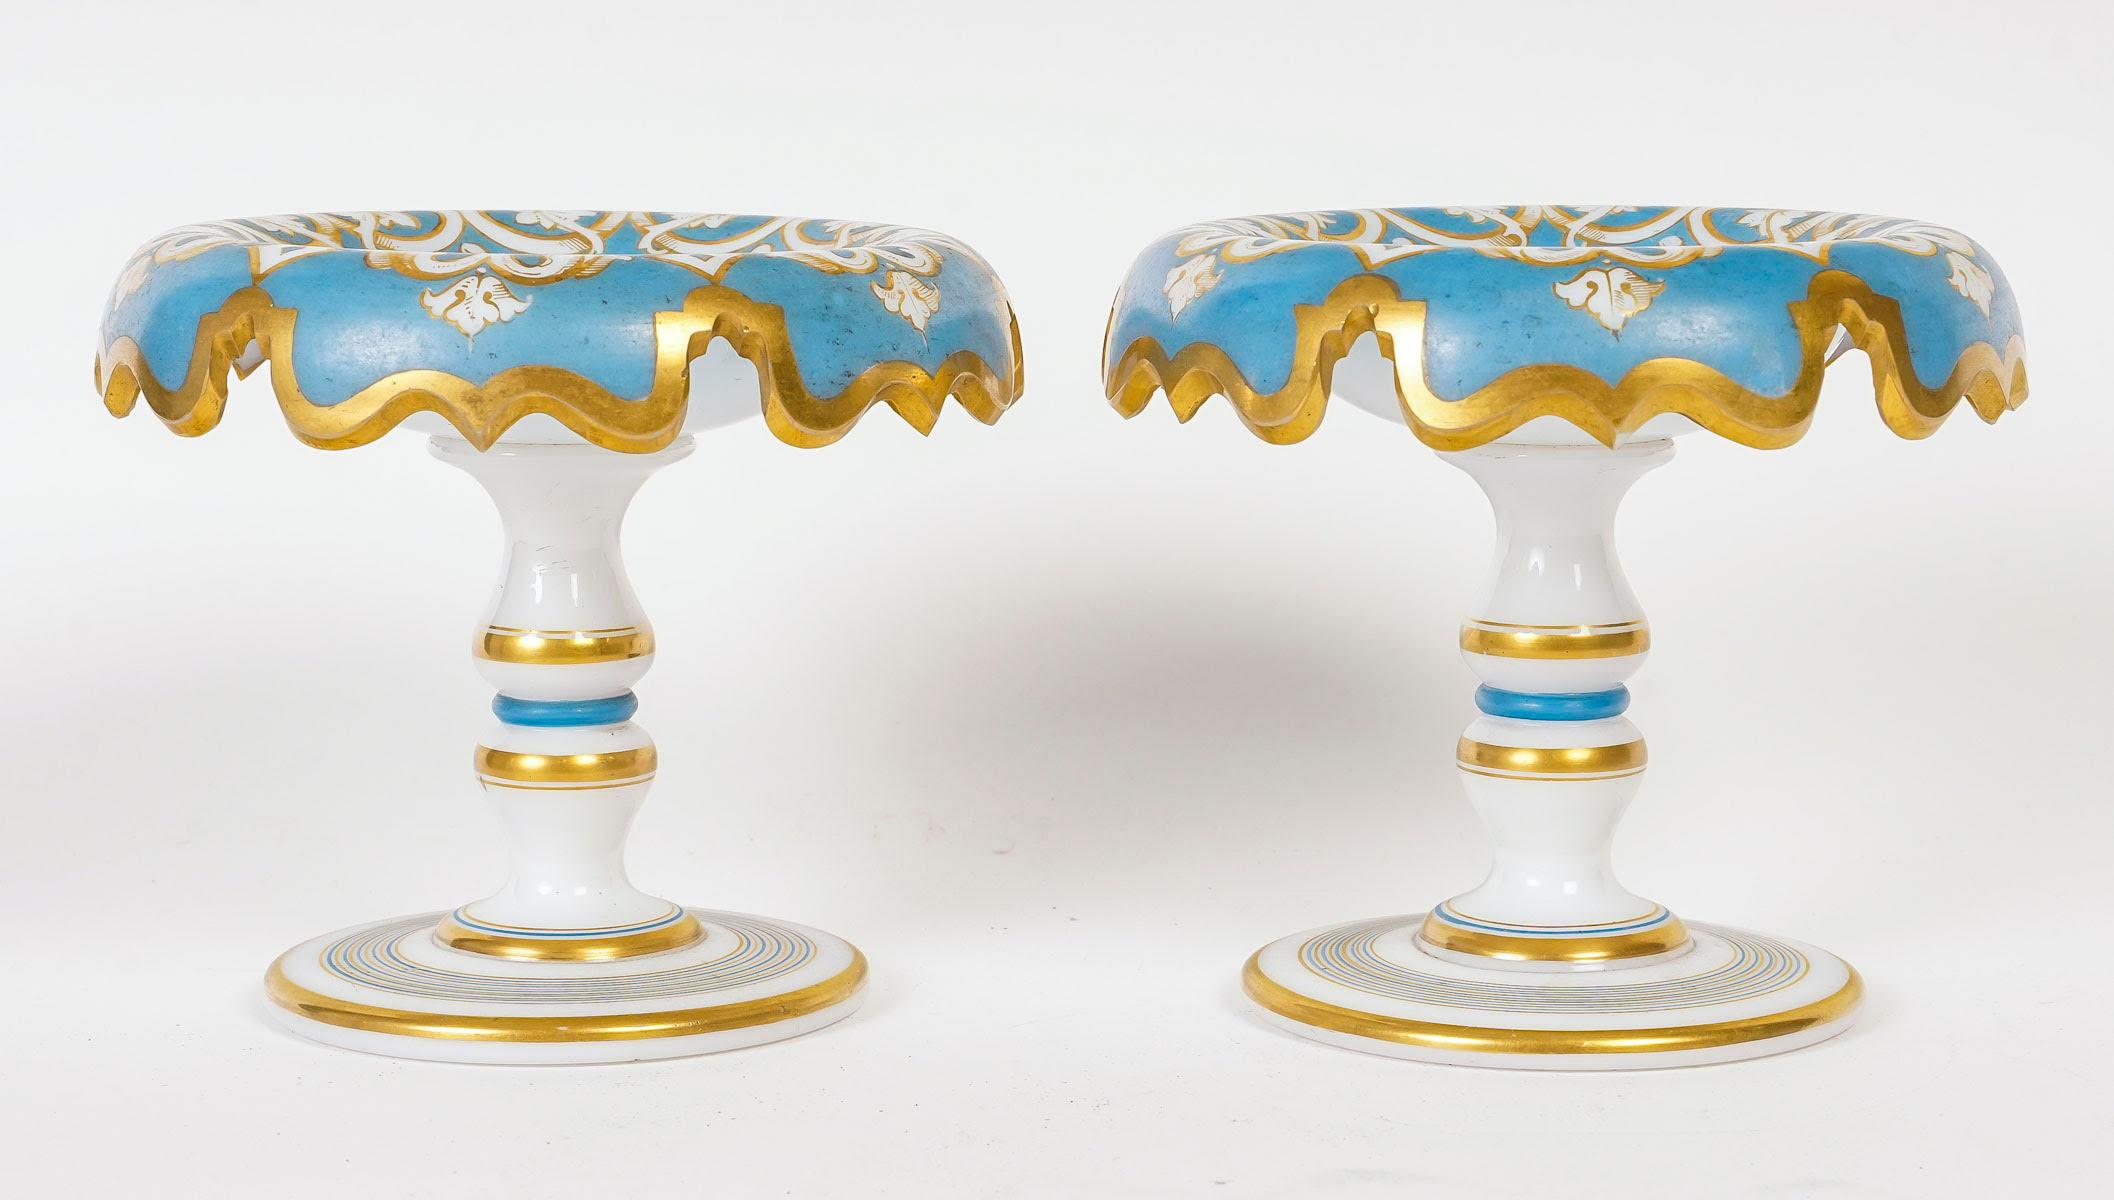 Pair of Blue and Gold Opaline Cups, 19th Century, Napoleon III period.

A pair of 19th century Napoleon III period blue and gold opaline goblets.
h: 12cm, l: 13cm